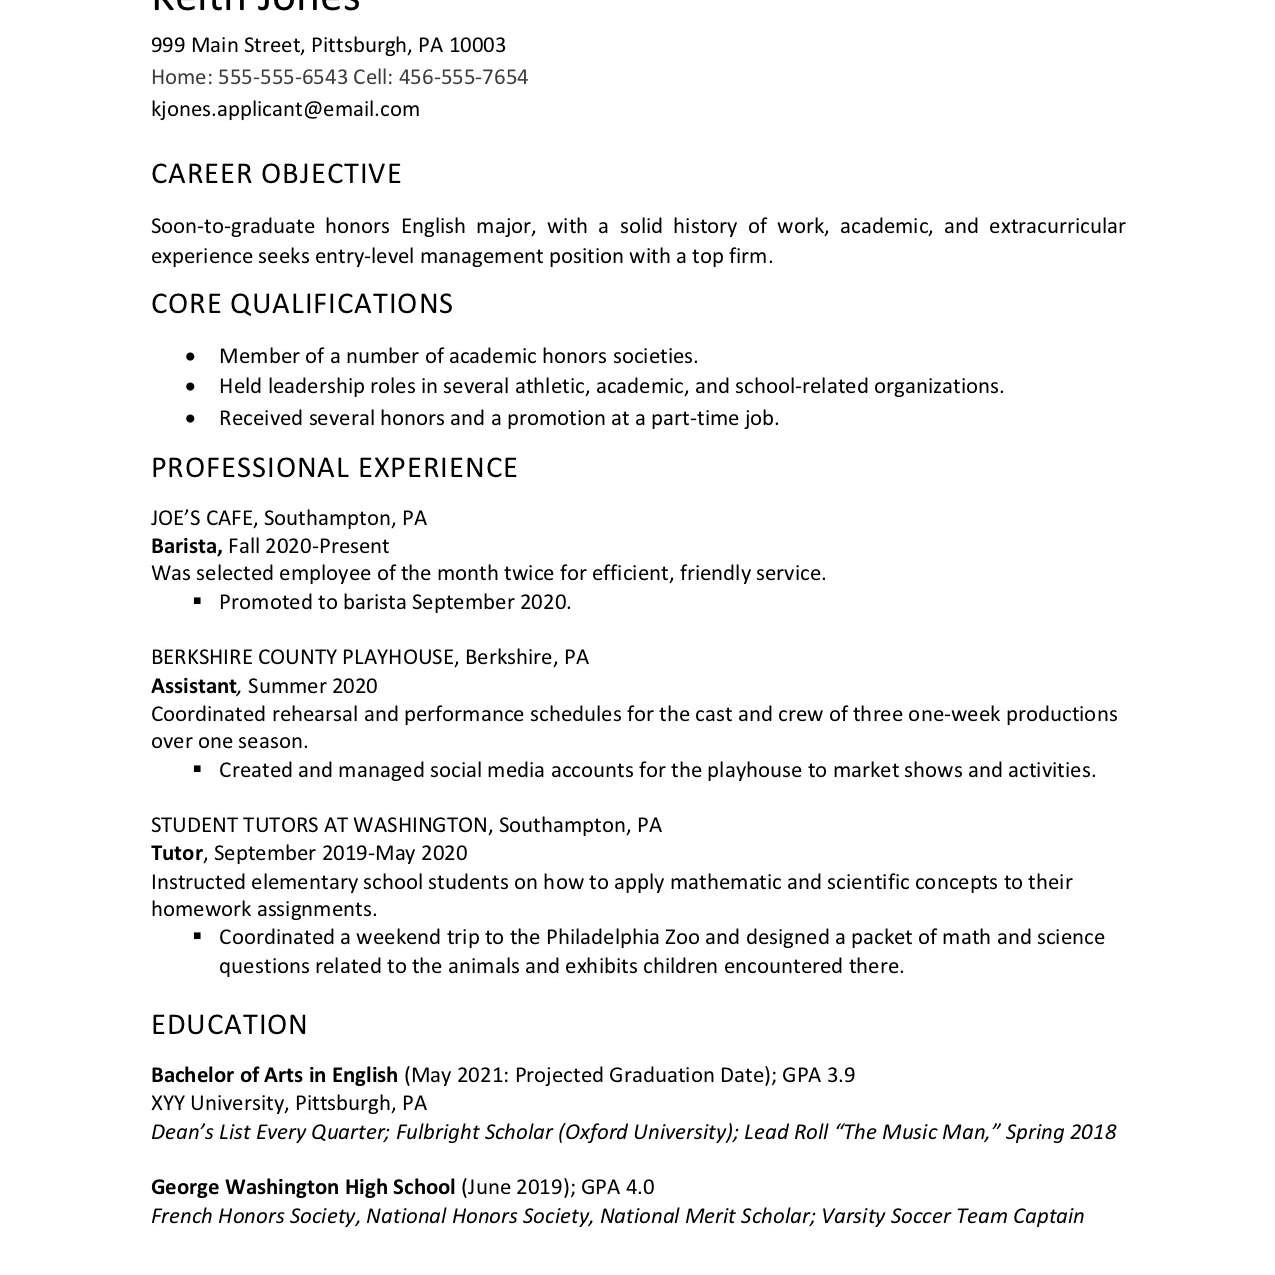 Sample Resume without High School Diploma High School Graduate Resume Example and Writing Tips